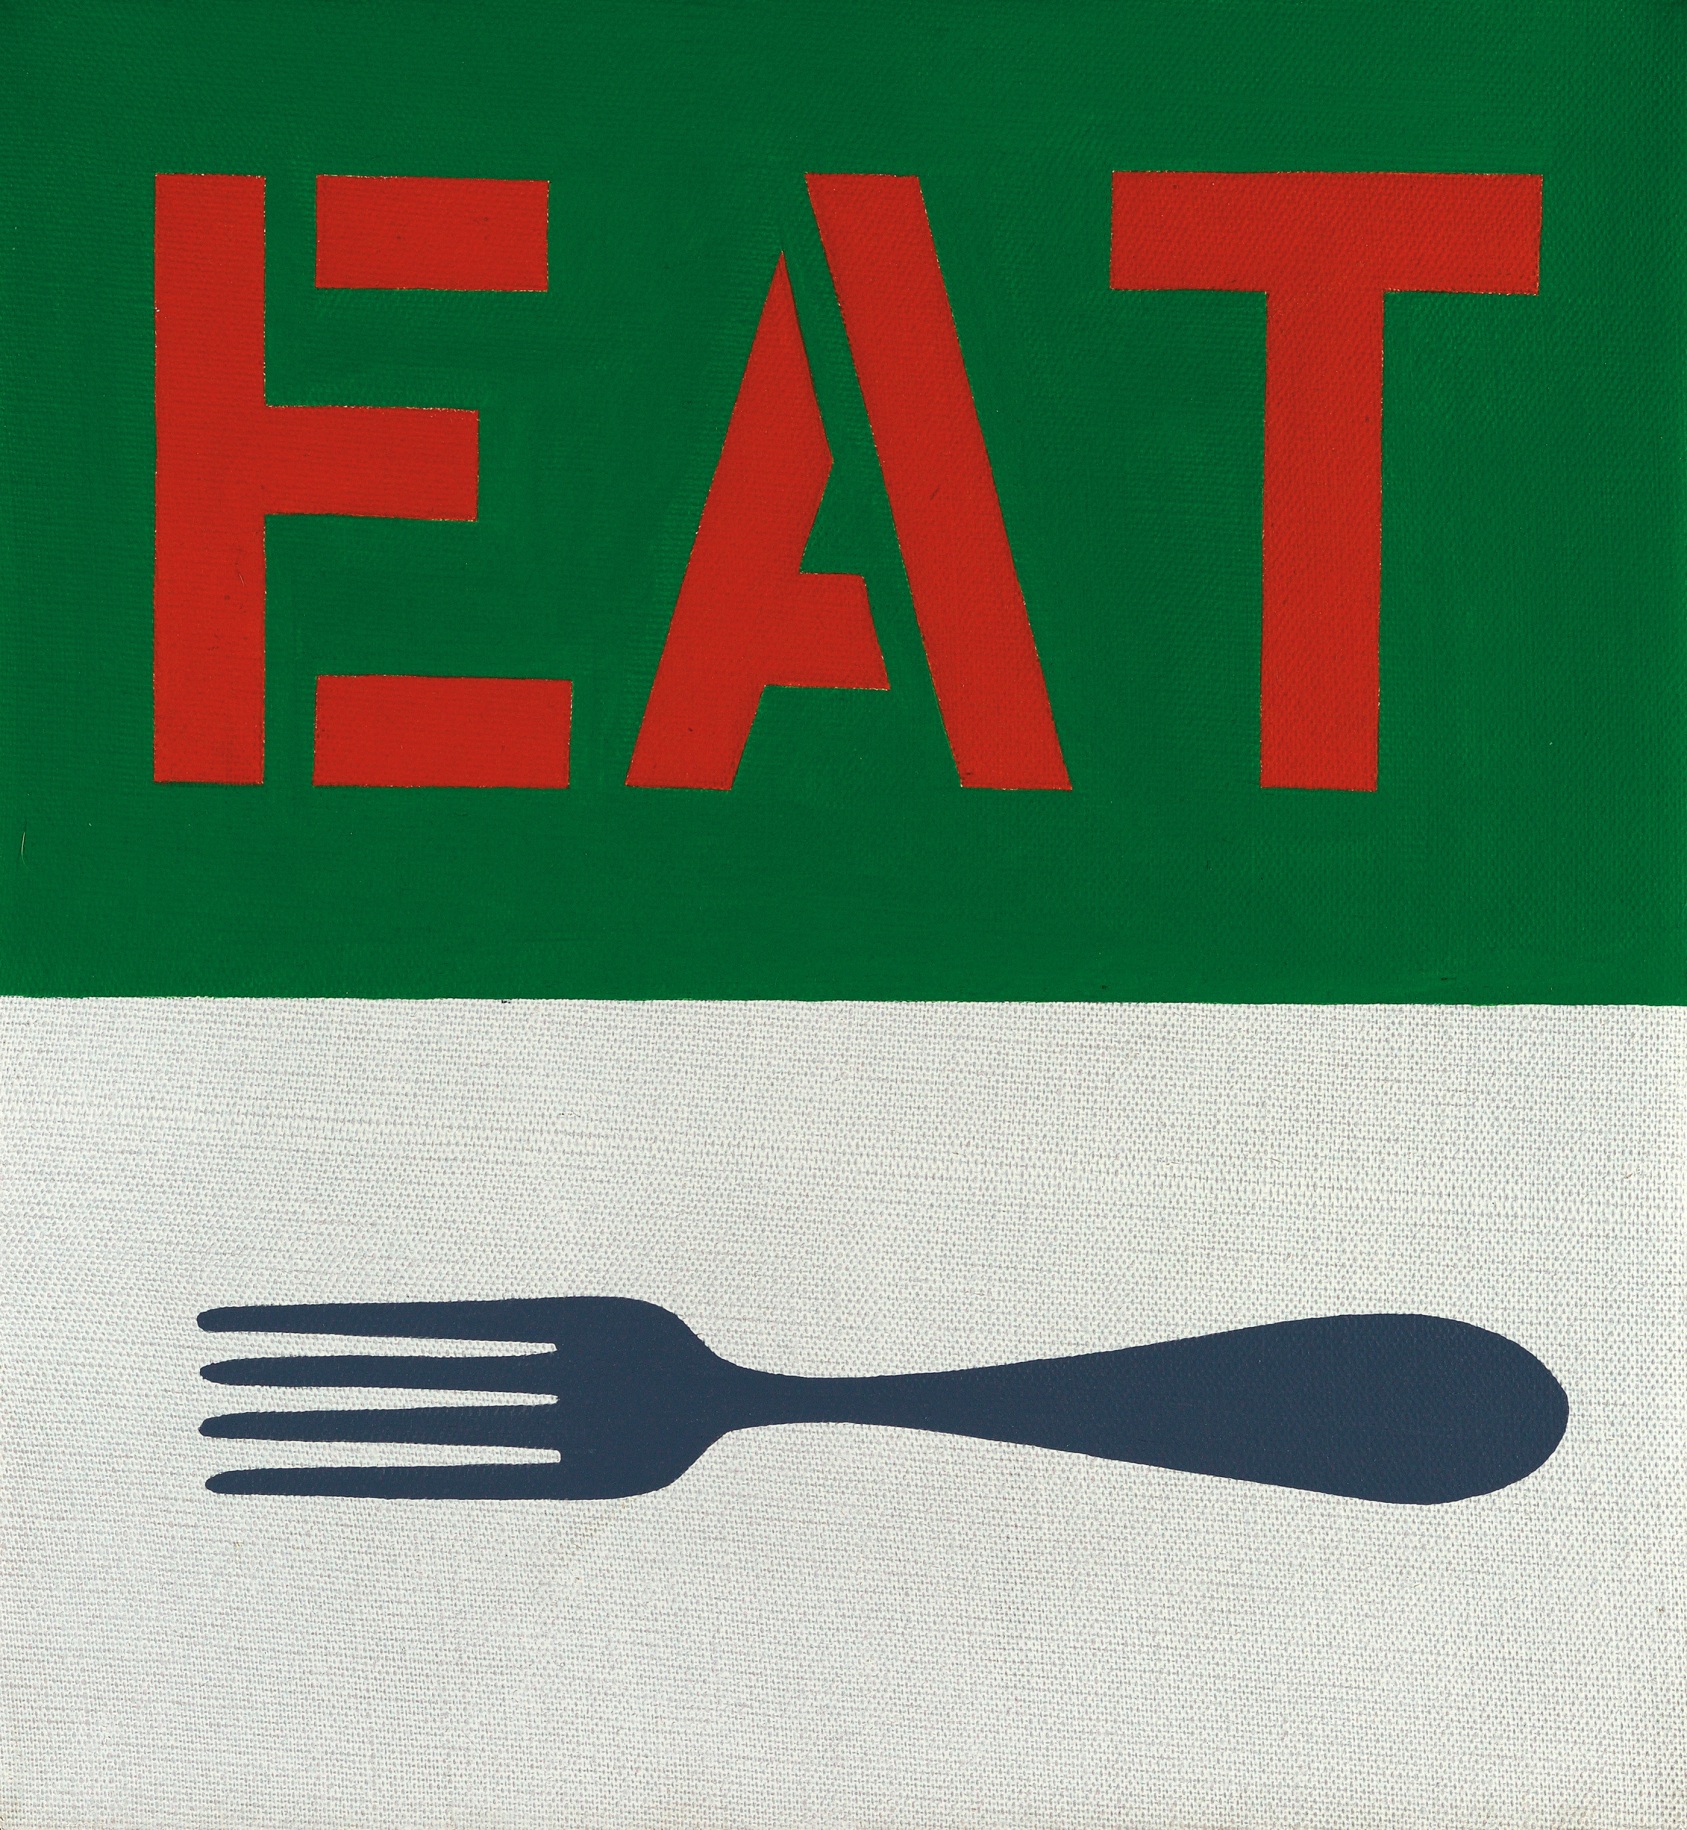 Fork, a small canvas, the upper half contains red stenciled letters spelling Eat on a green background. The bottom half of the canvas is white and contains a black fork with the tines facing to the left.